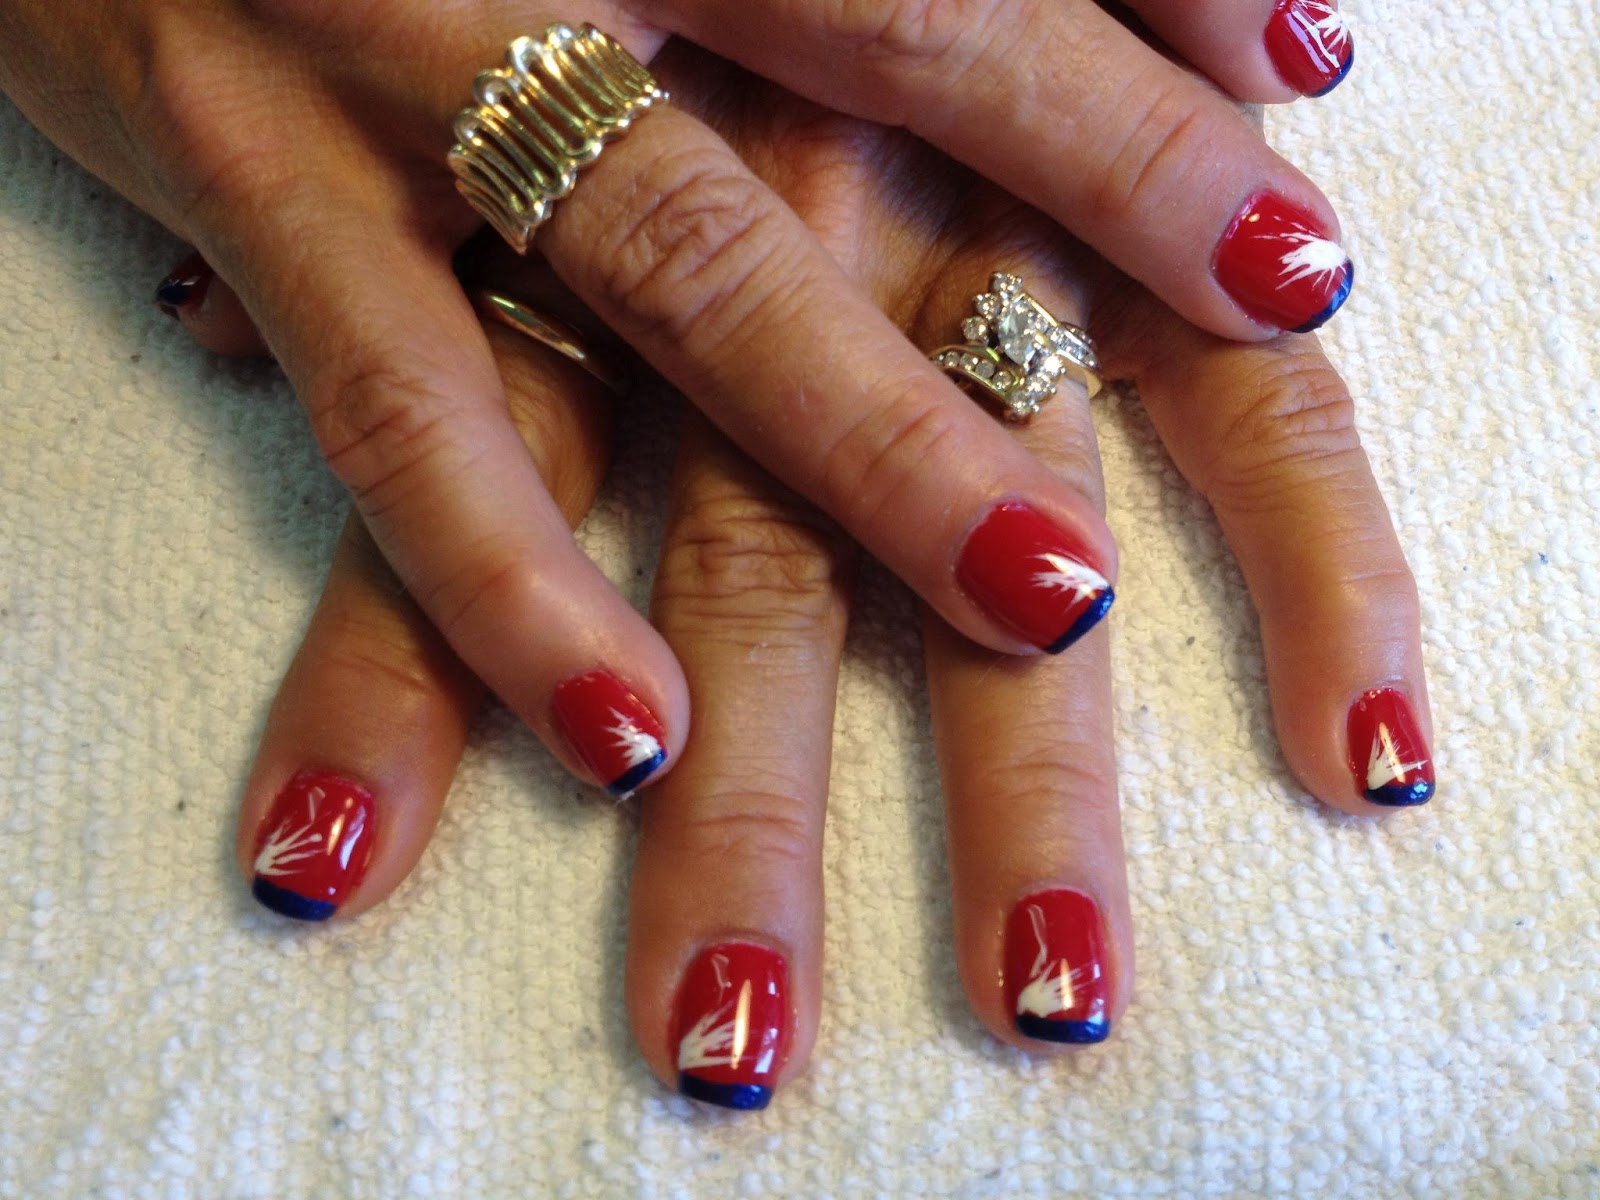 2. Chiefs Nail Designs - wide 5